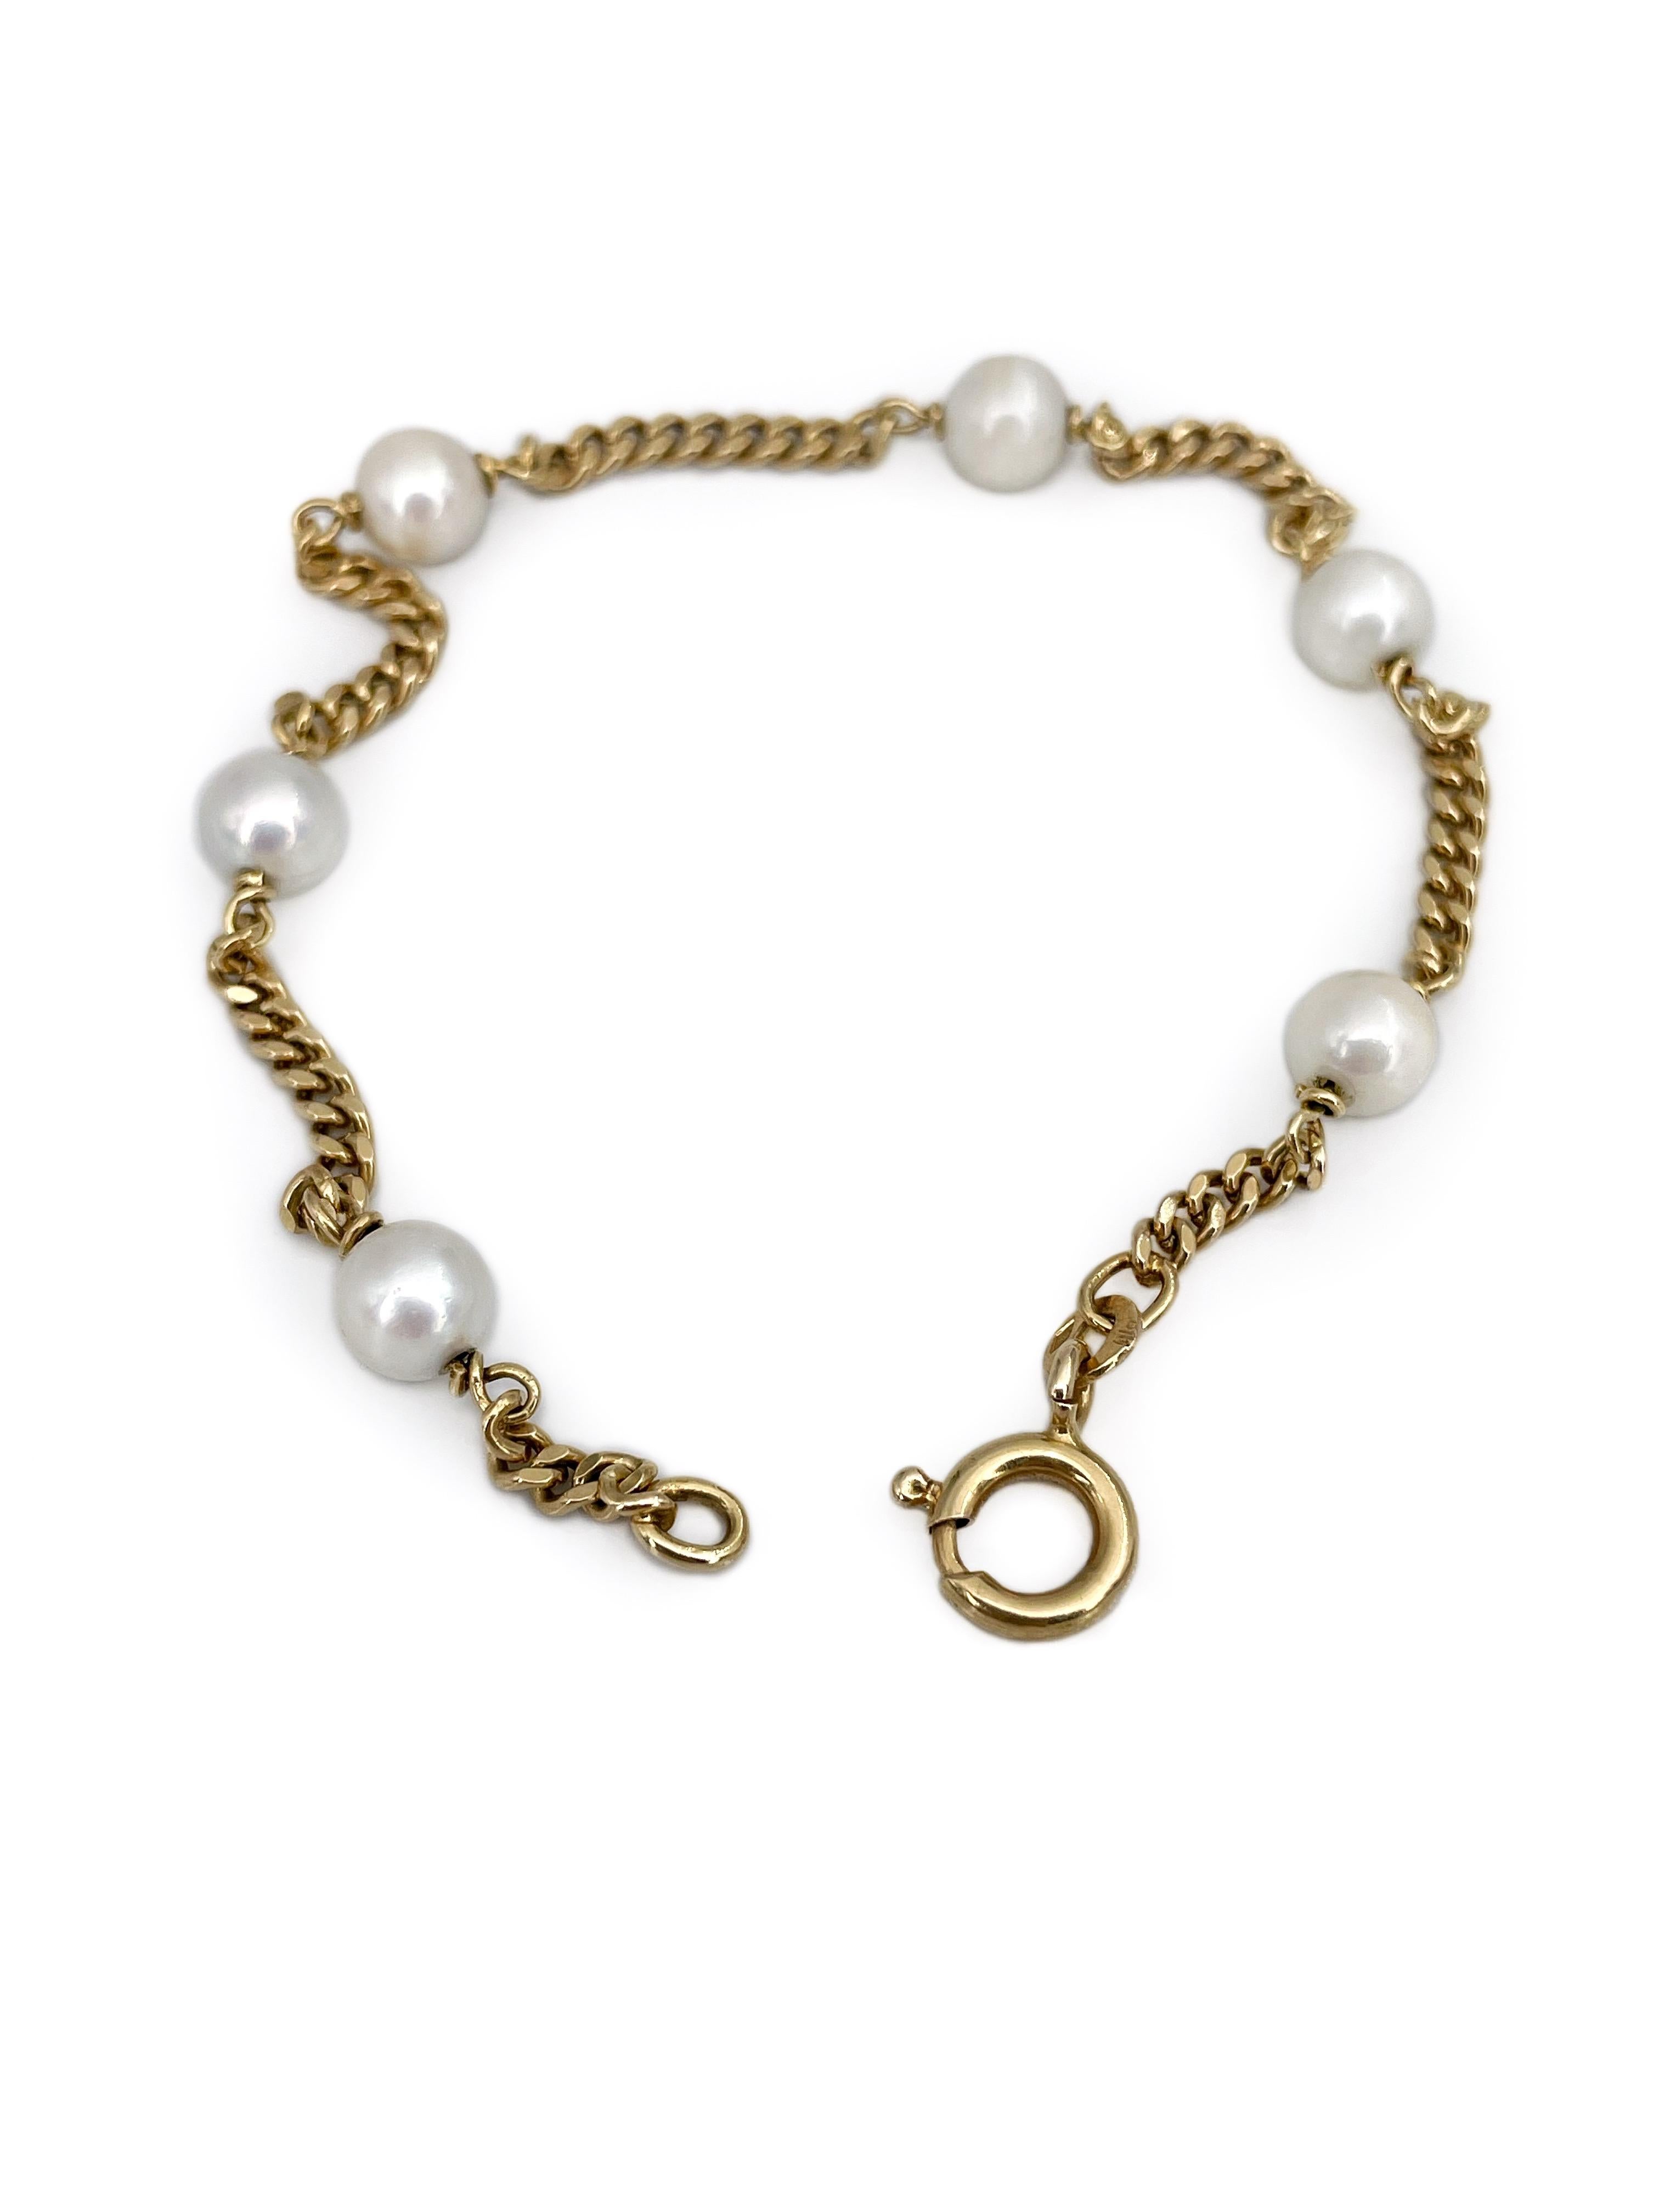 This is a stylish vintage chain bracelet crafted in 18K yellow gold. The piece features 6 cultured pearls. It fits wide wrist. 

Weight: 6.84g
Length: 20cm

———

If you have any questions, please feel free to ask. We describe our items accurately.